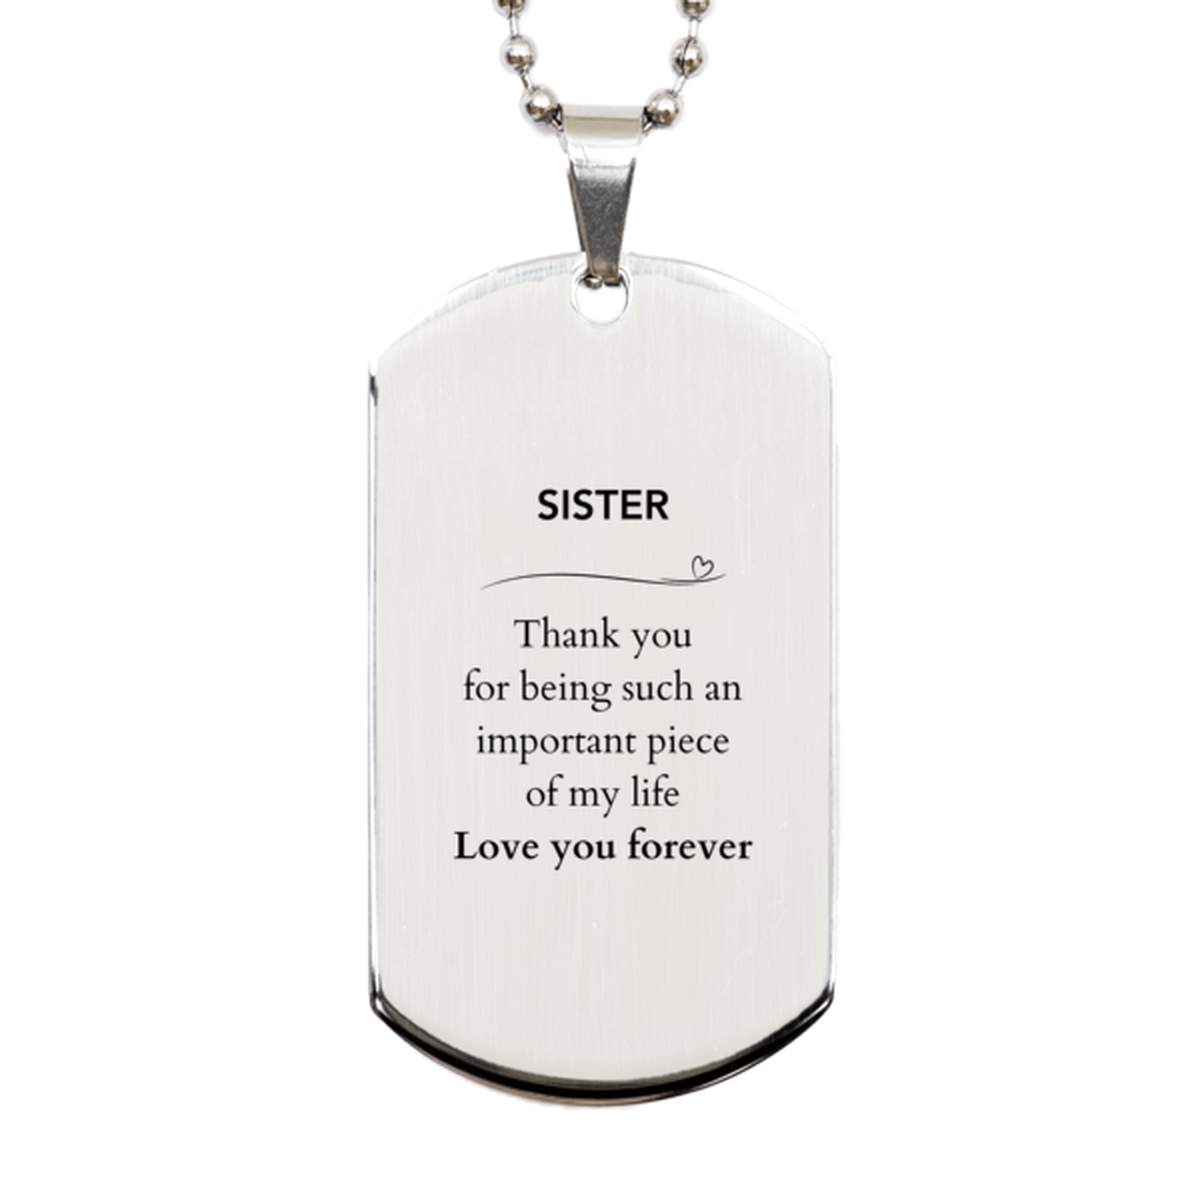 Appropriate Sister Silver Dog Tag Epic Birthday Gifts for Sister Thank you for being such an important piece of my life Sister Christmas Mothers Fathers Day